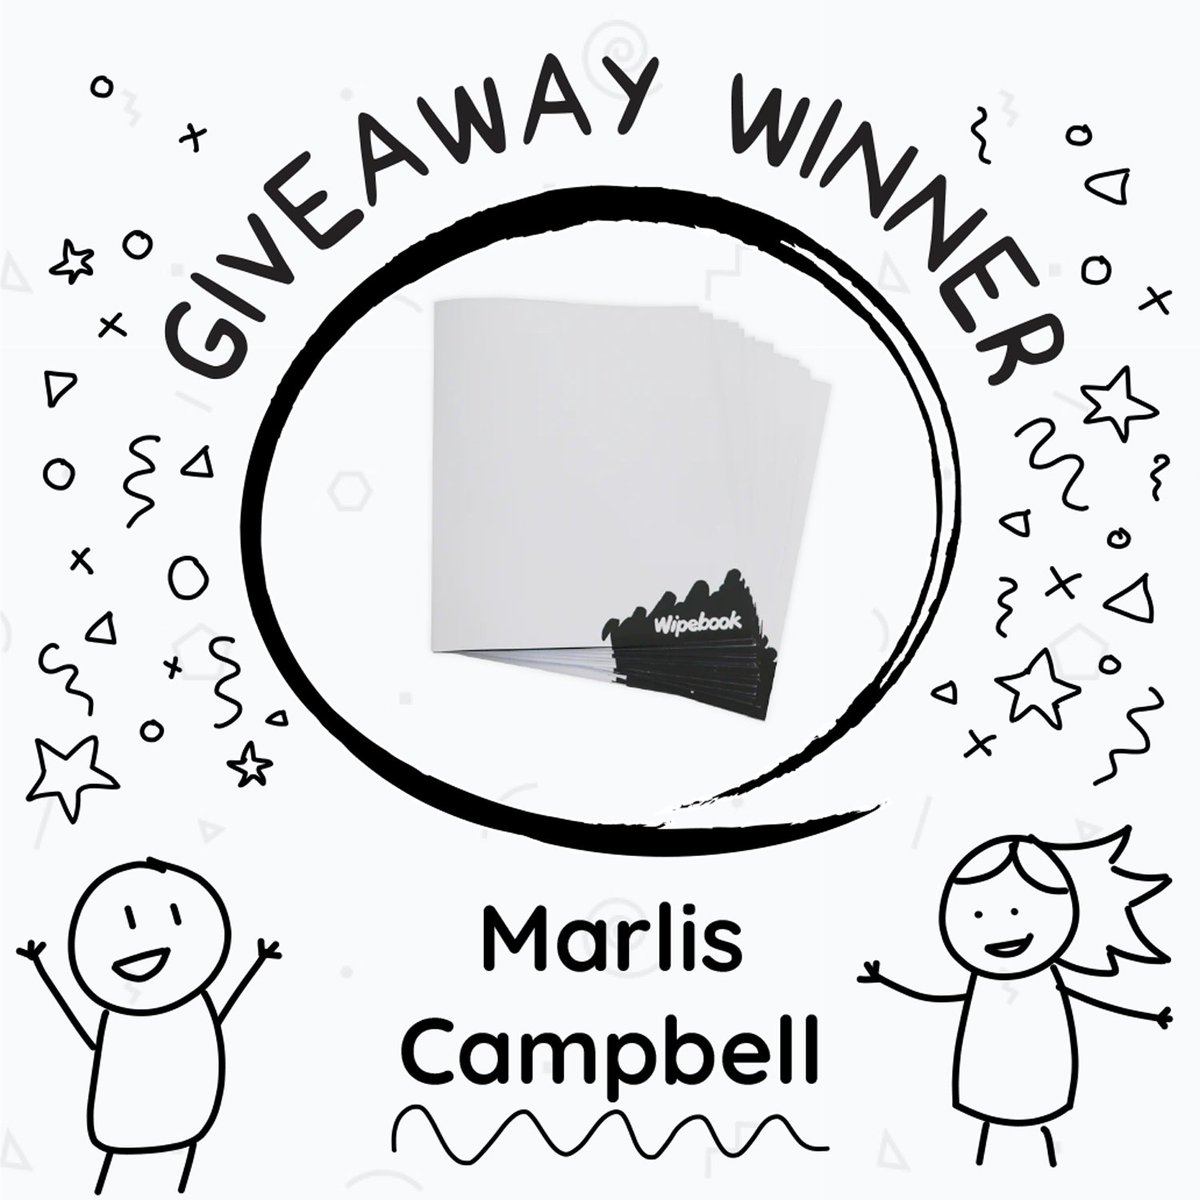 Congratulations Marlis Campbell, our weekly Workbook winner!💥 Enter the weekly giveaway: wipebook.com/giveaway #workbook #giveaway #contest #win